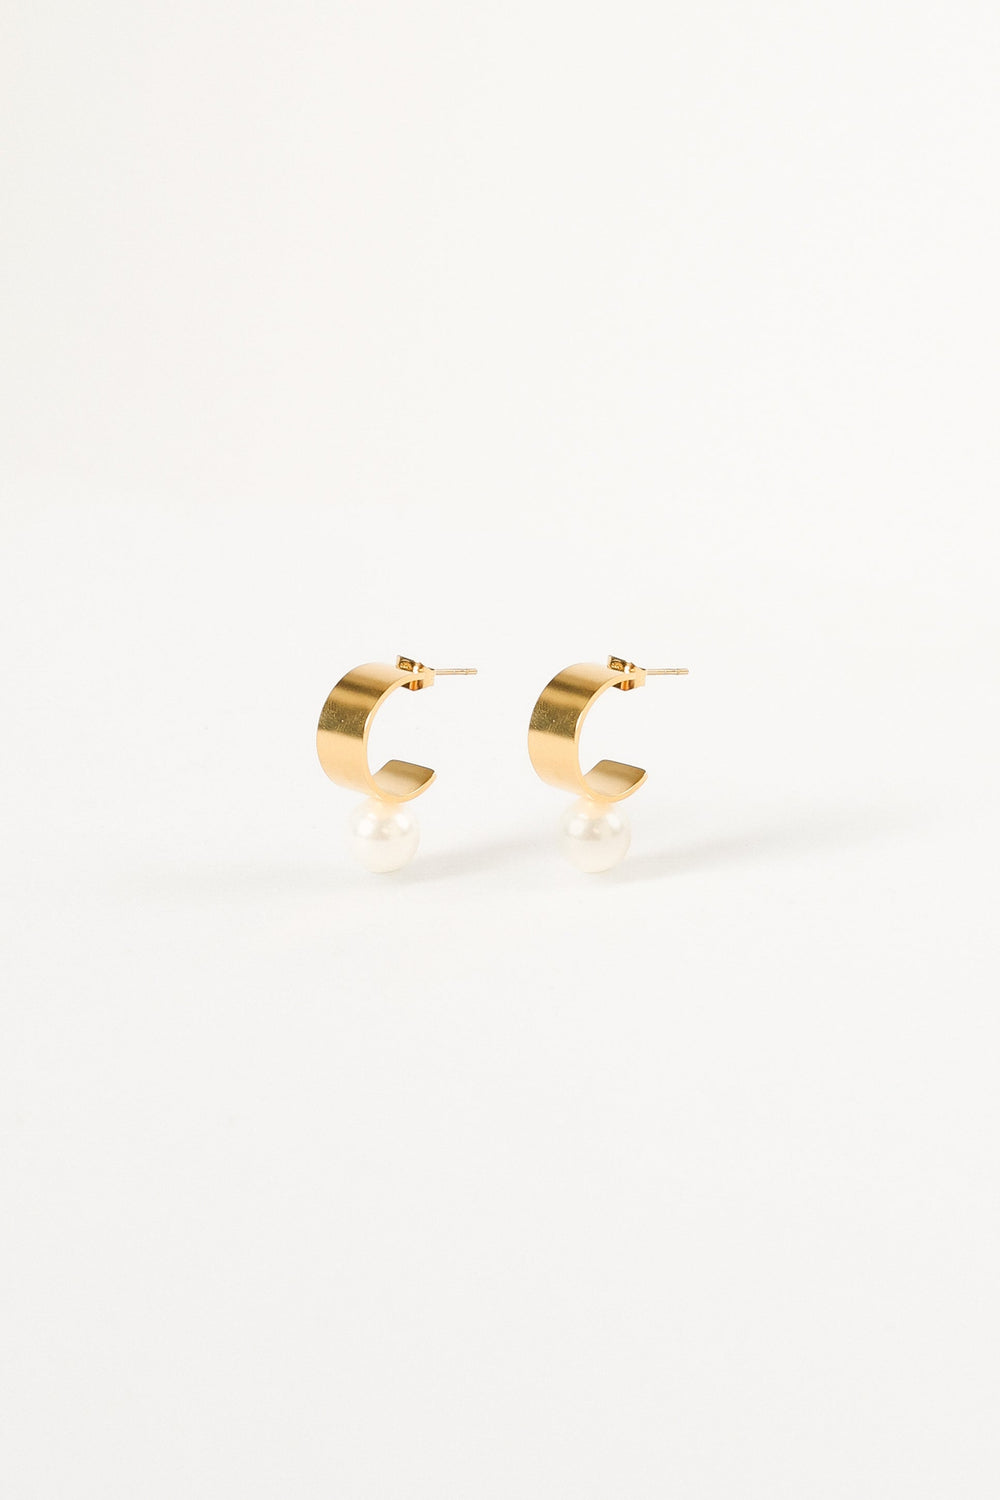 Petal and Pup USA ACCESSORIES Callie Pearl Hoop Earrings - Gold One Size